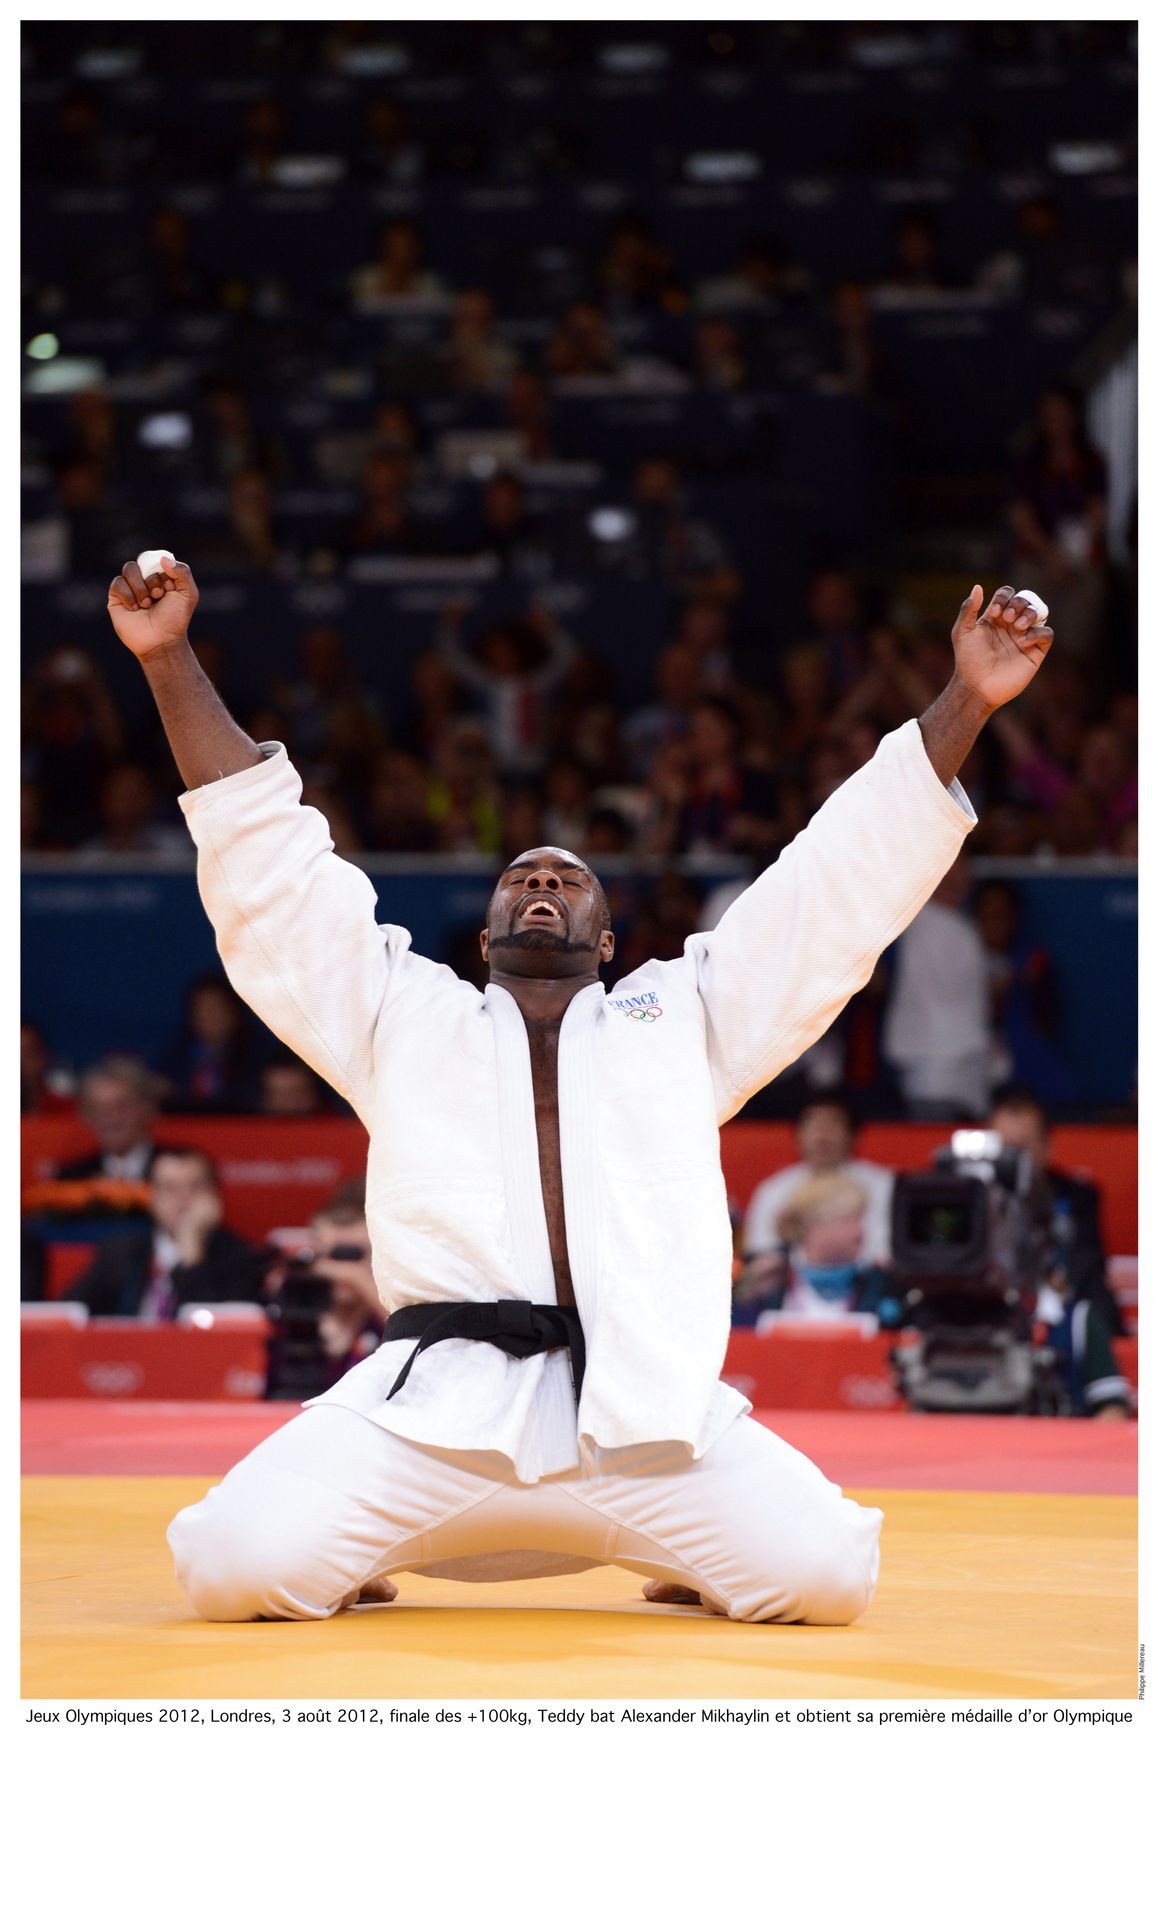 Teddy RINER Photo print* : Teddy Riner wins his 1st gold medal at the London Oly&hellip;